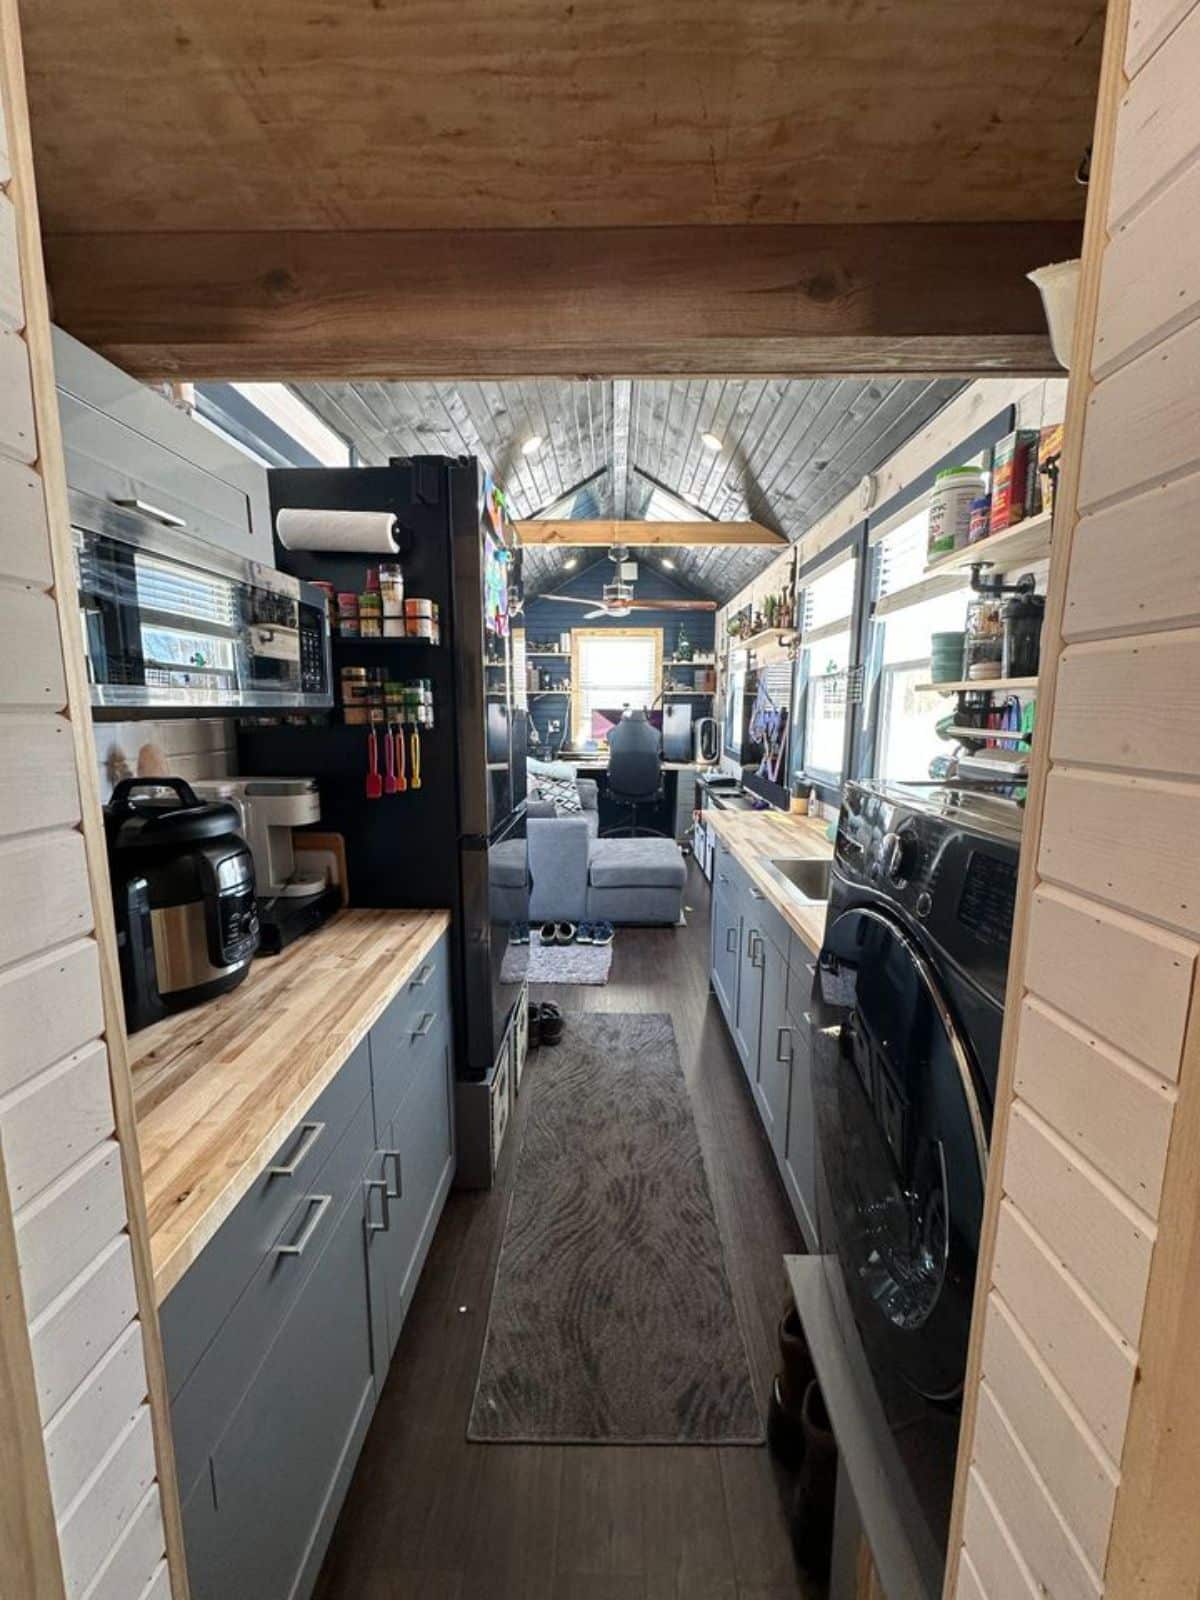 full length interior view of 32' fully furnished tiny home from bathroom view